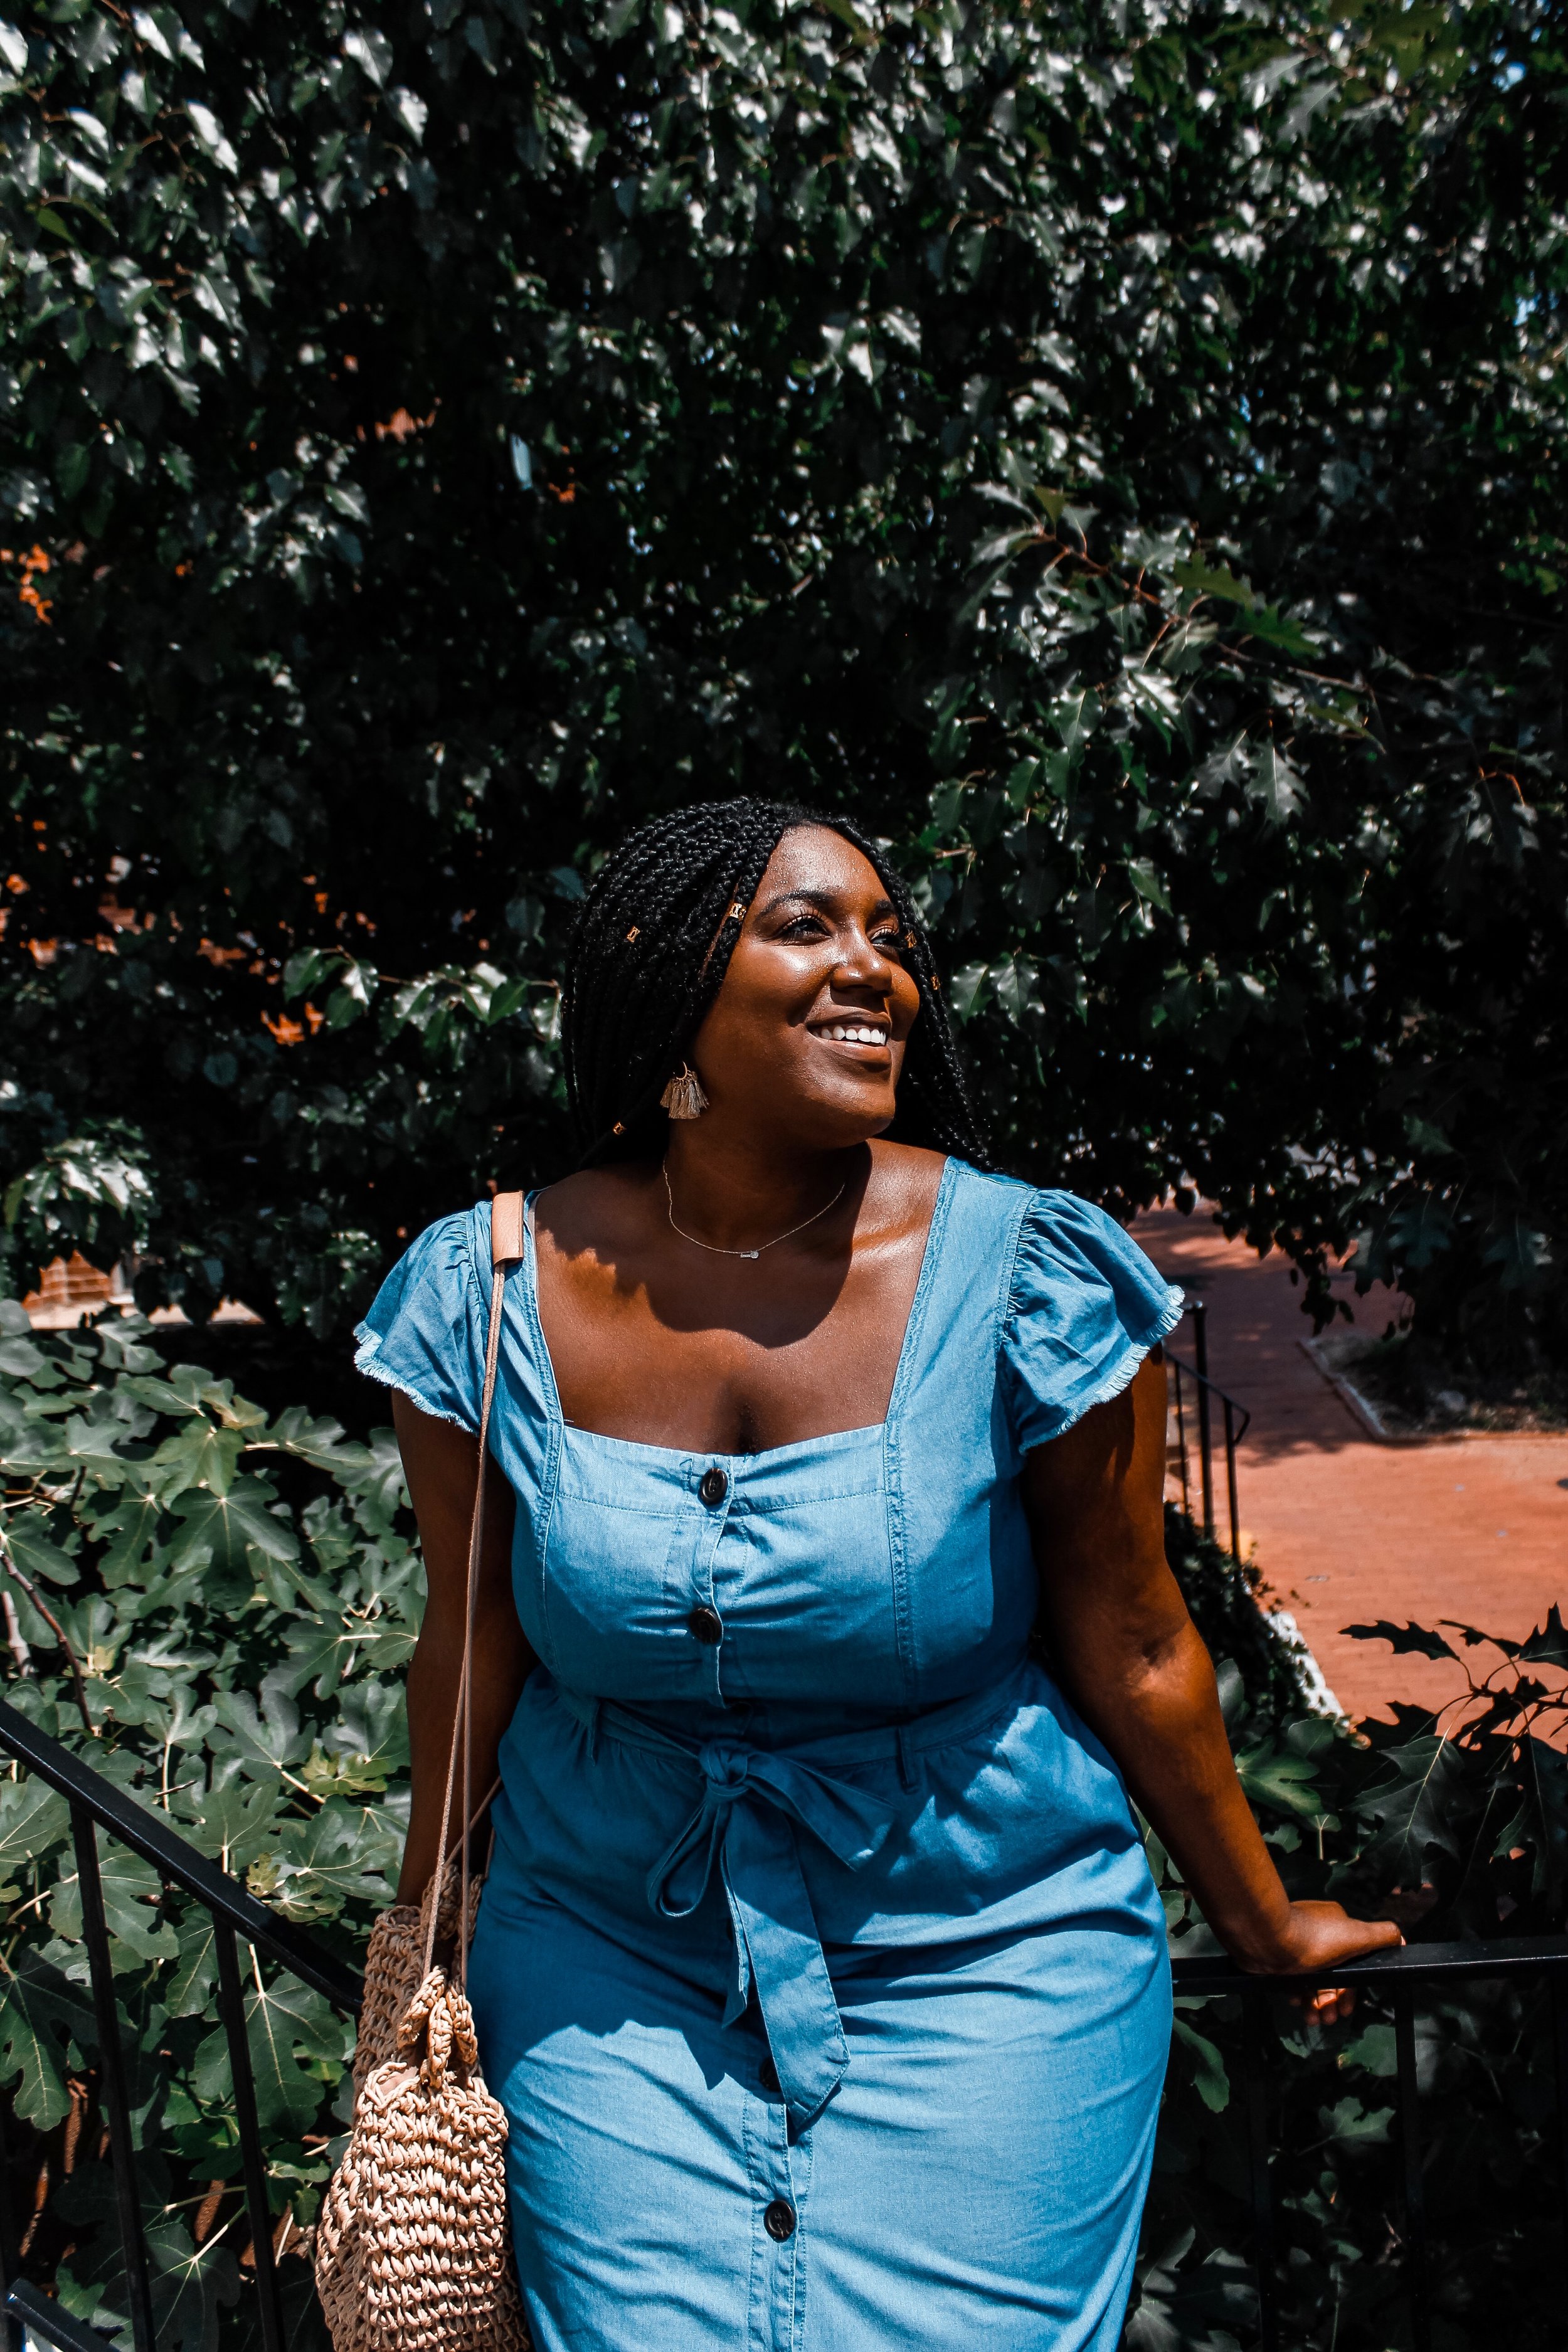 About Charmaine — Plus Size Fashion Influencer & Consultant